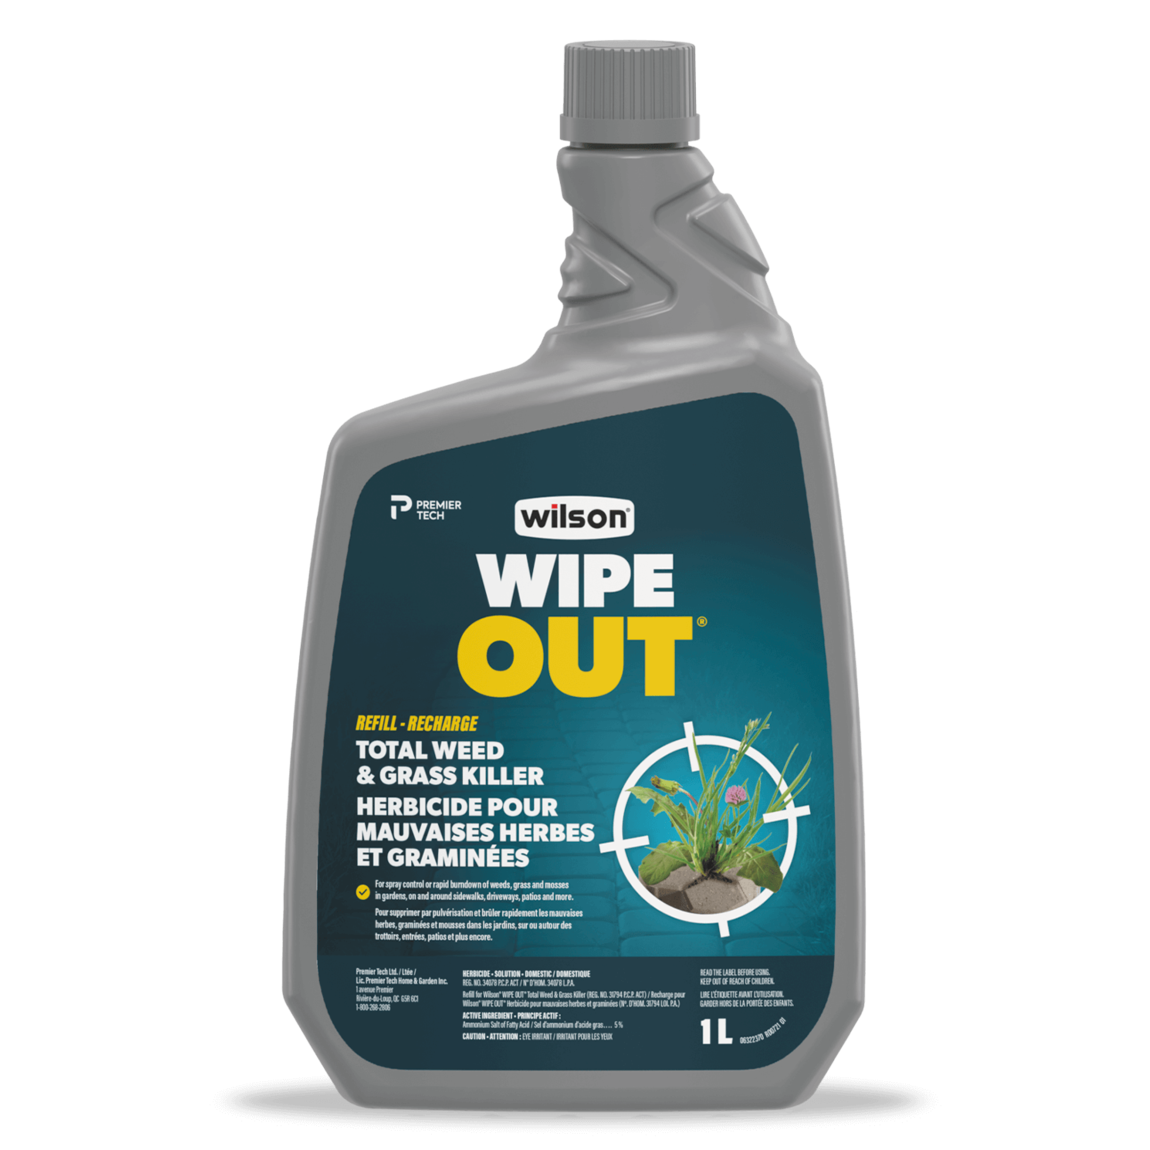 Refill your WIPE OUT Products easily with this bottle